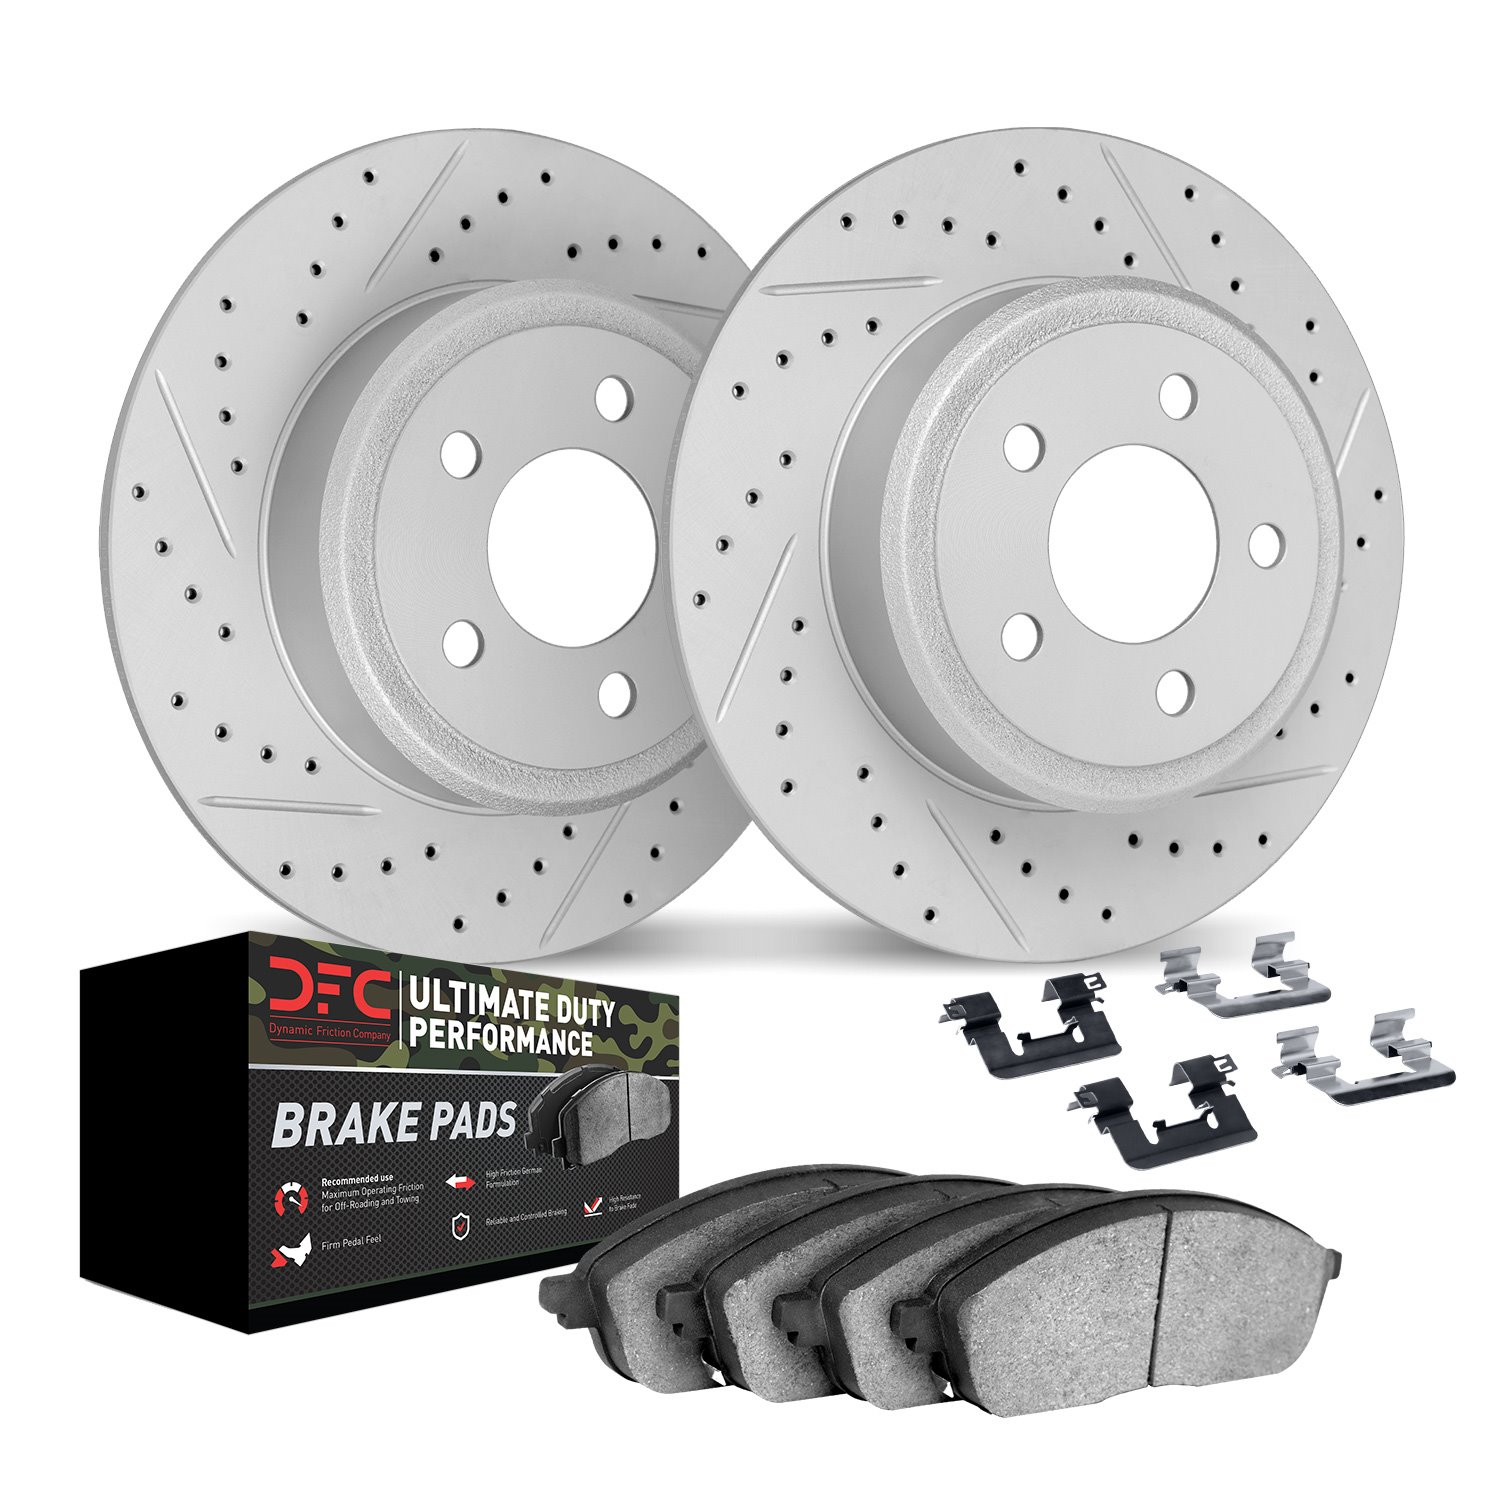 2412-54036 Geoperformance Drilled/Slotted Brake Rotors with Ultimate-Duty Brake Pads Kit & Hardware, 1997-2004 Ford/Lincoln/Merc